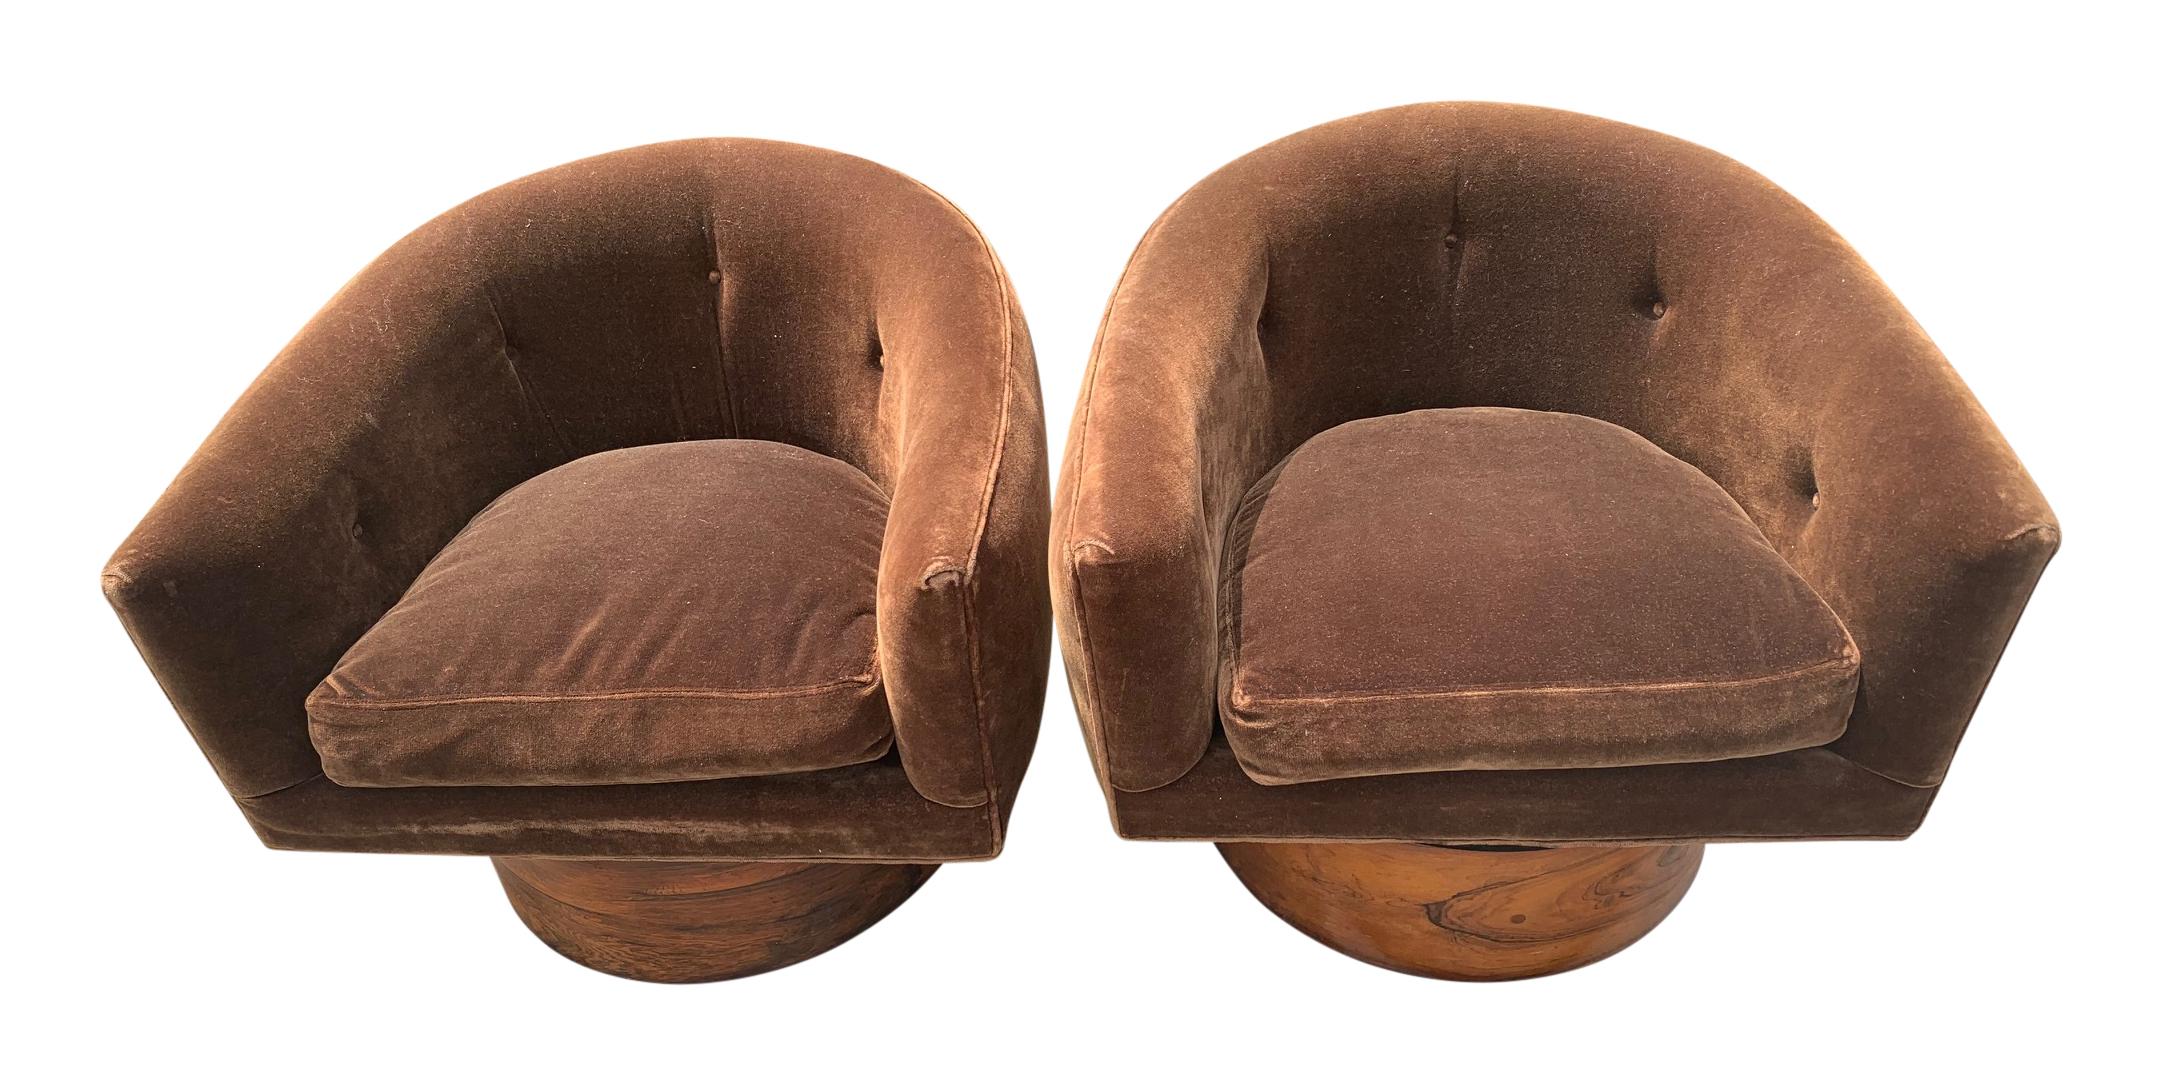 North American Pair of Milo Baughman for Thayer Coggin Swivel Chairs